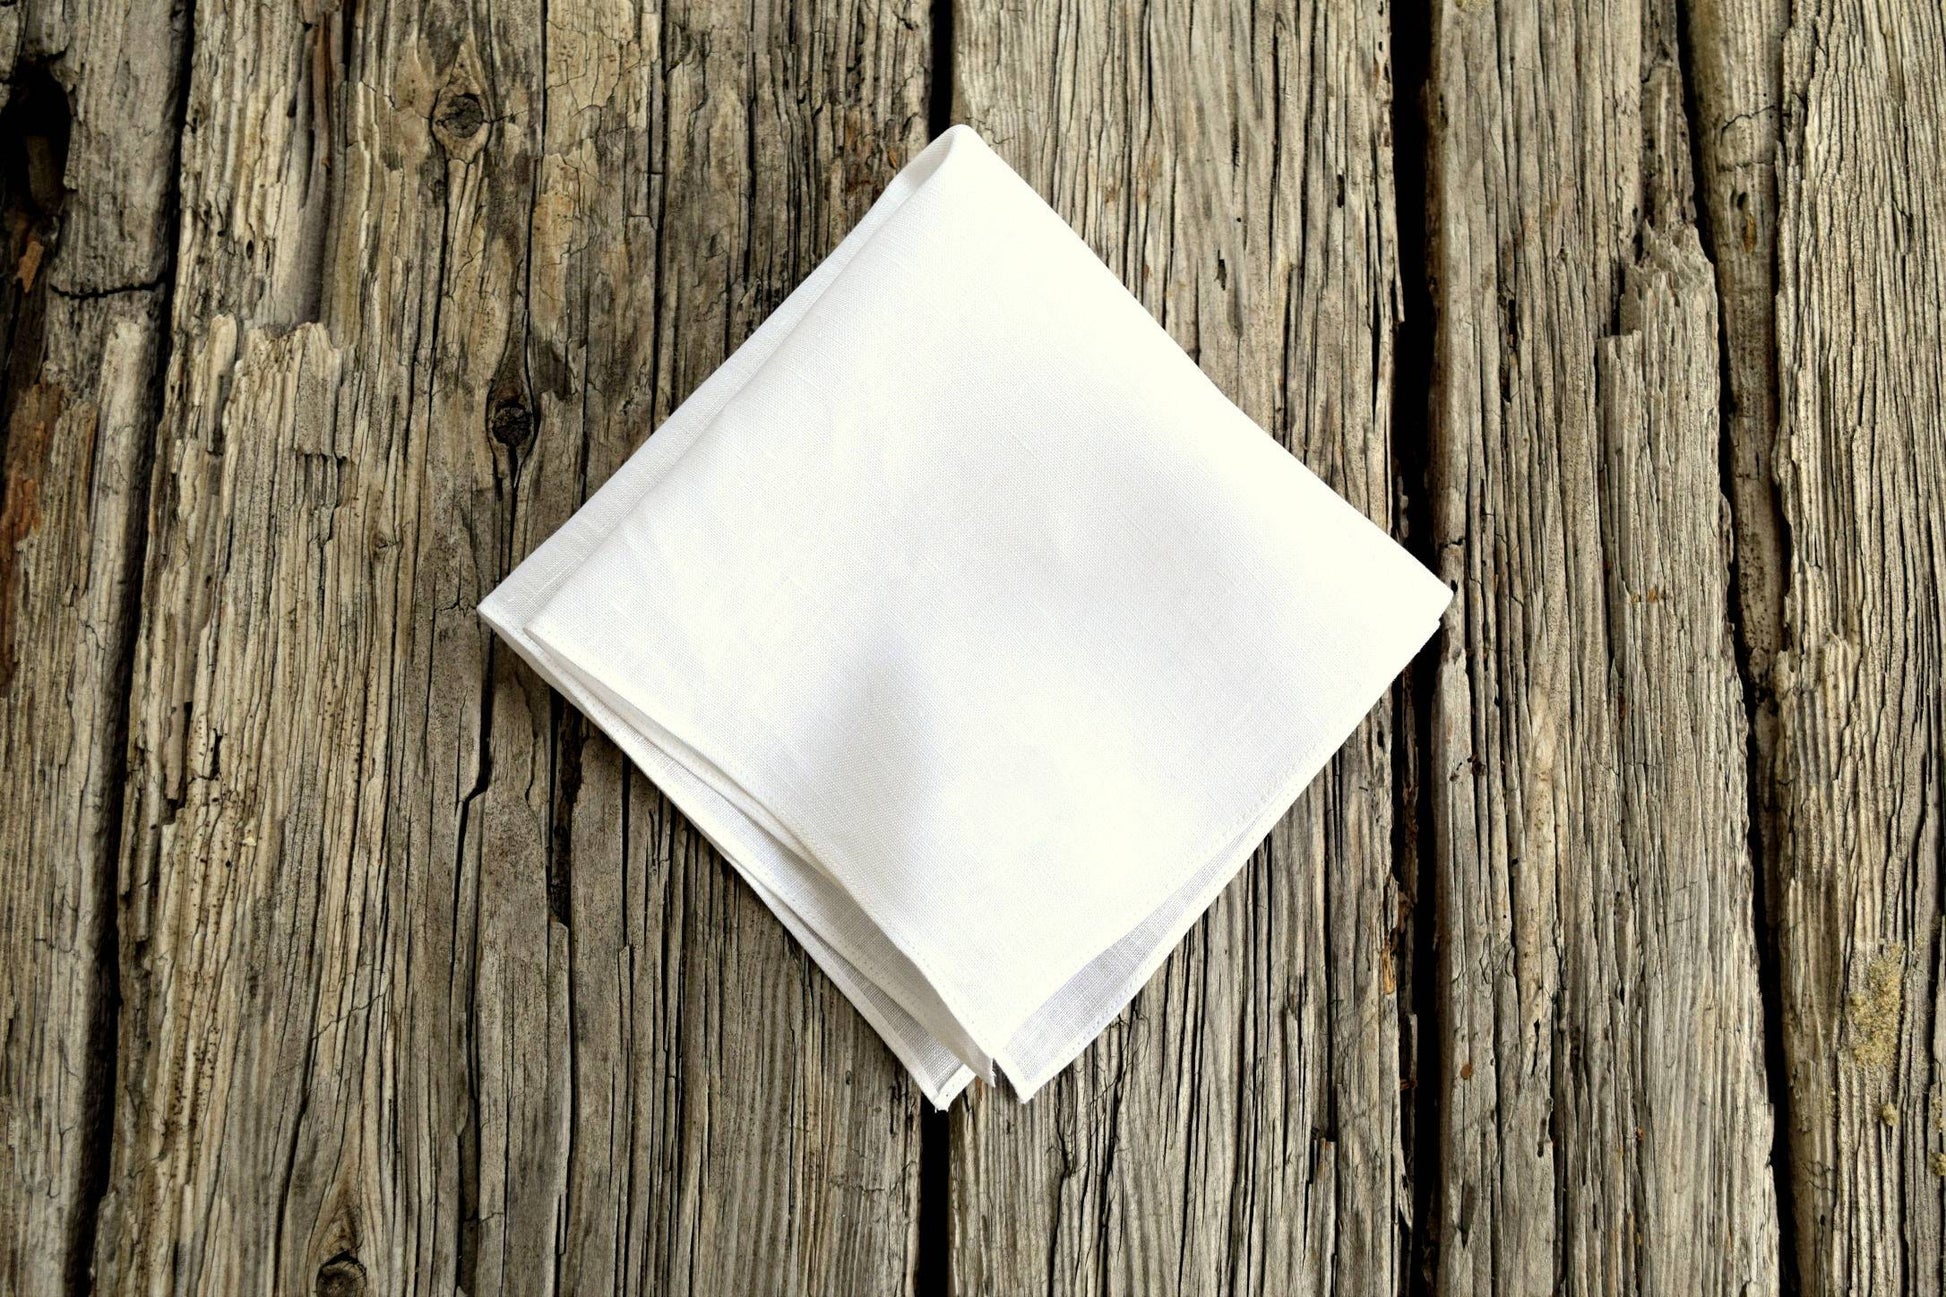 White Irish linen handkerchief folded into quarters and resting on weathered wood boards